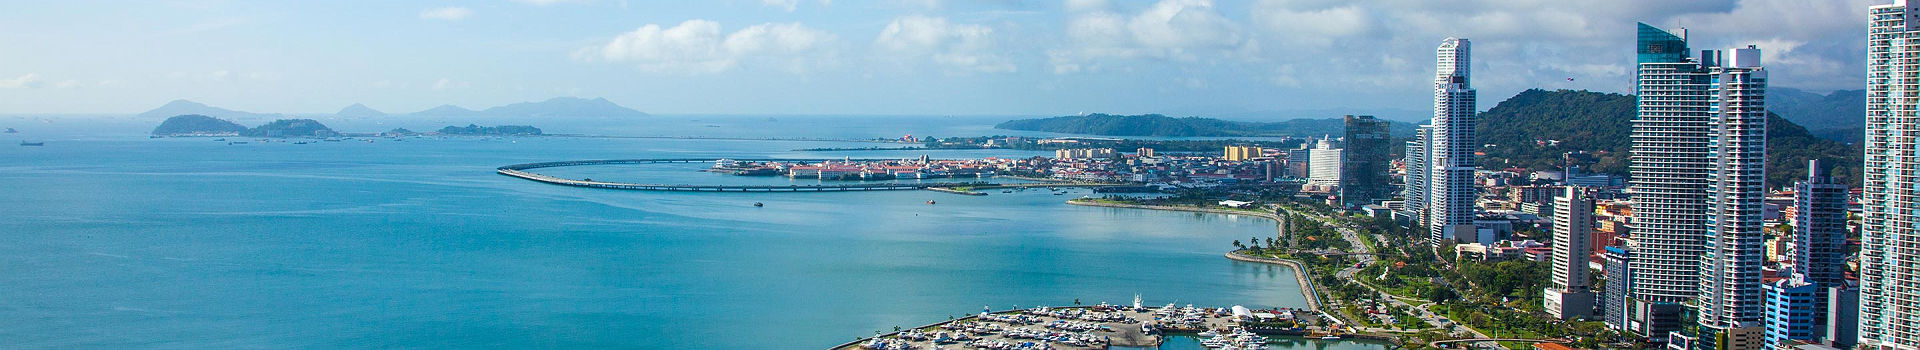 Aerial View from Panama City in Panama.View to Casco Viejo and Panama Canal